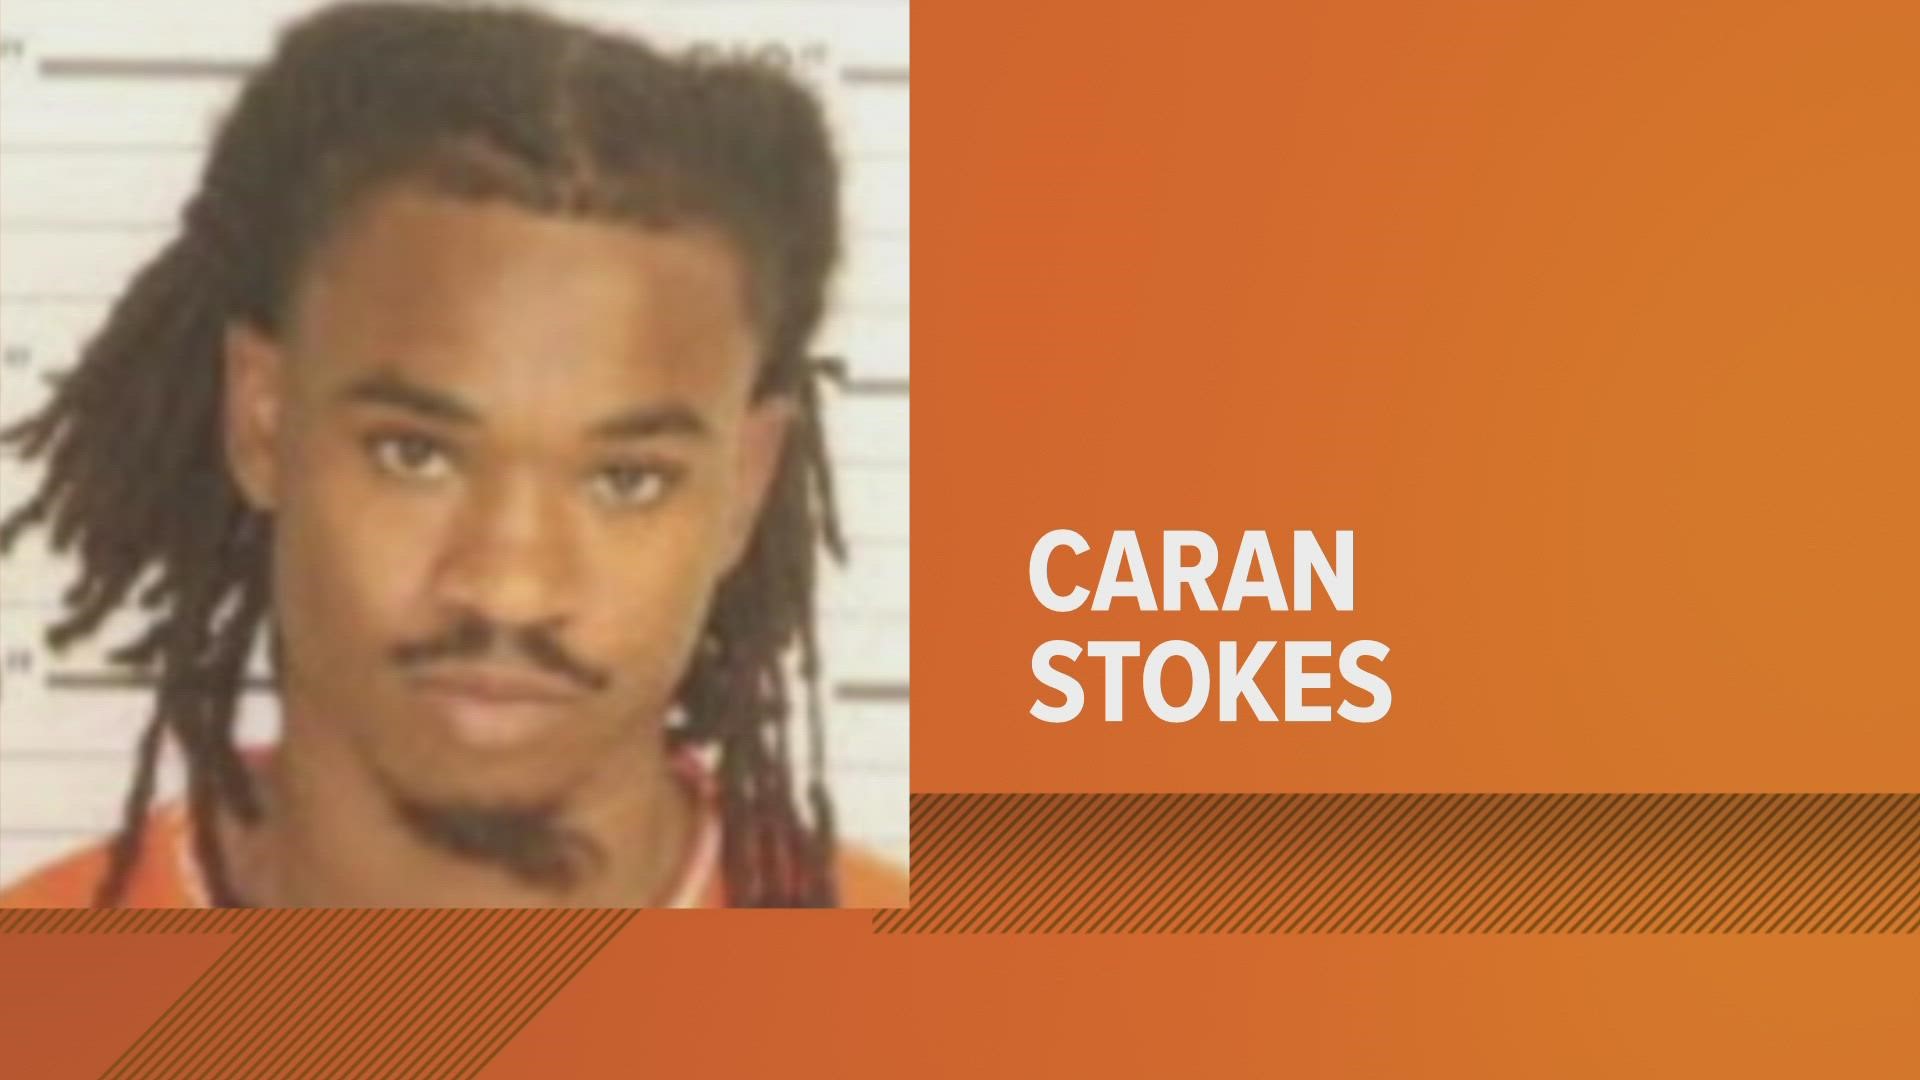 Caran Stokes is being held at the Shelby County Jail without bond.